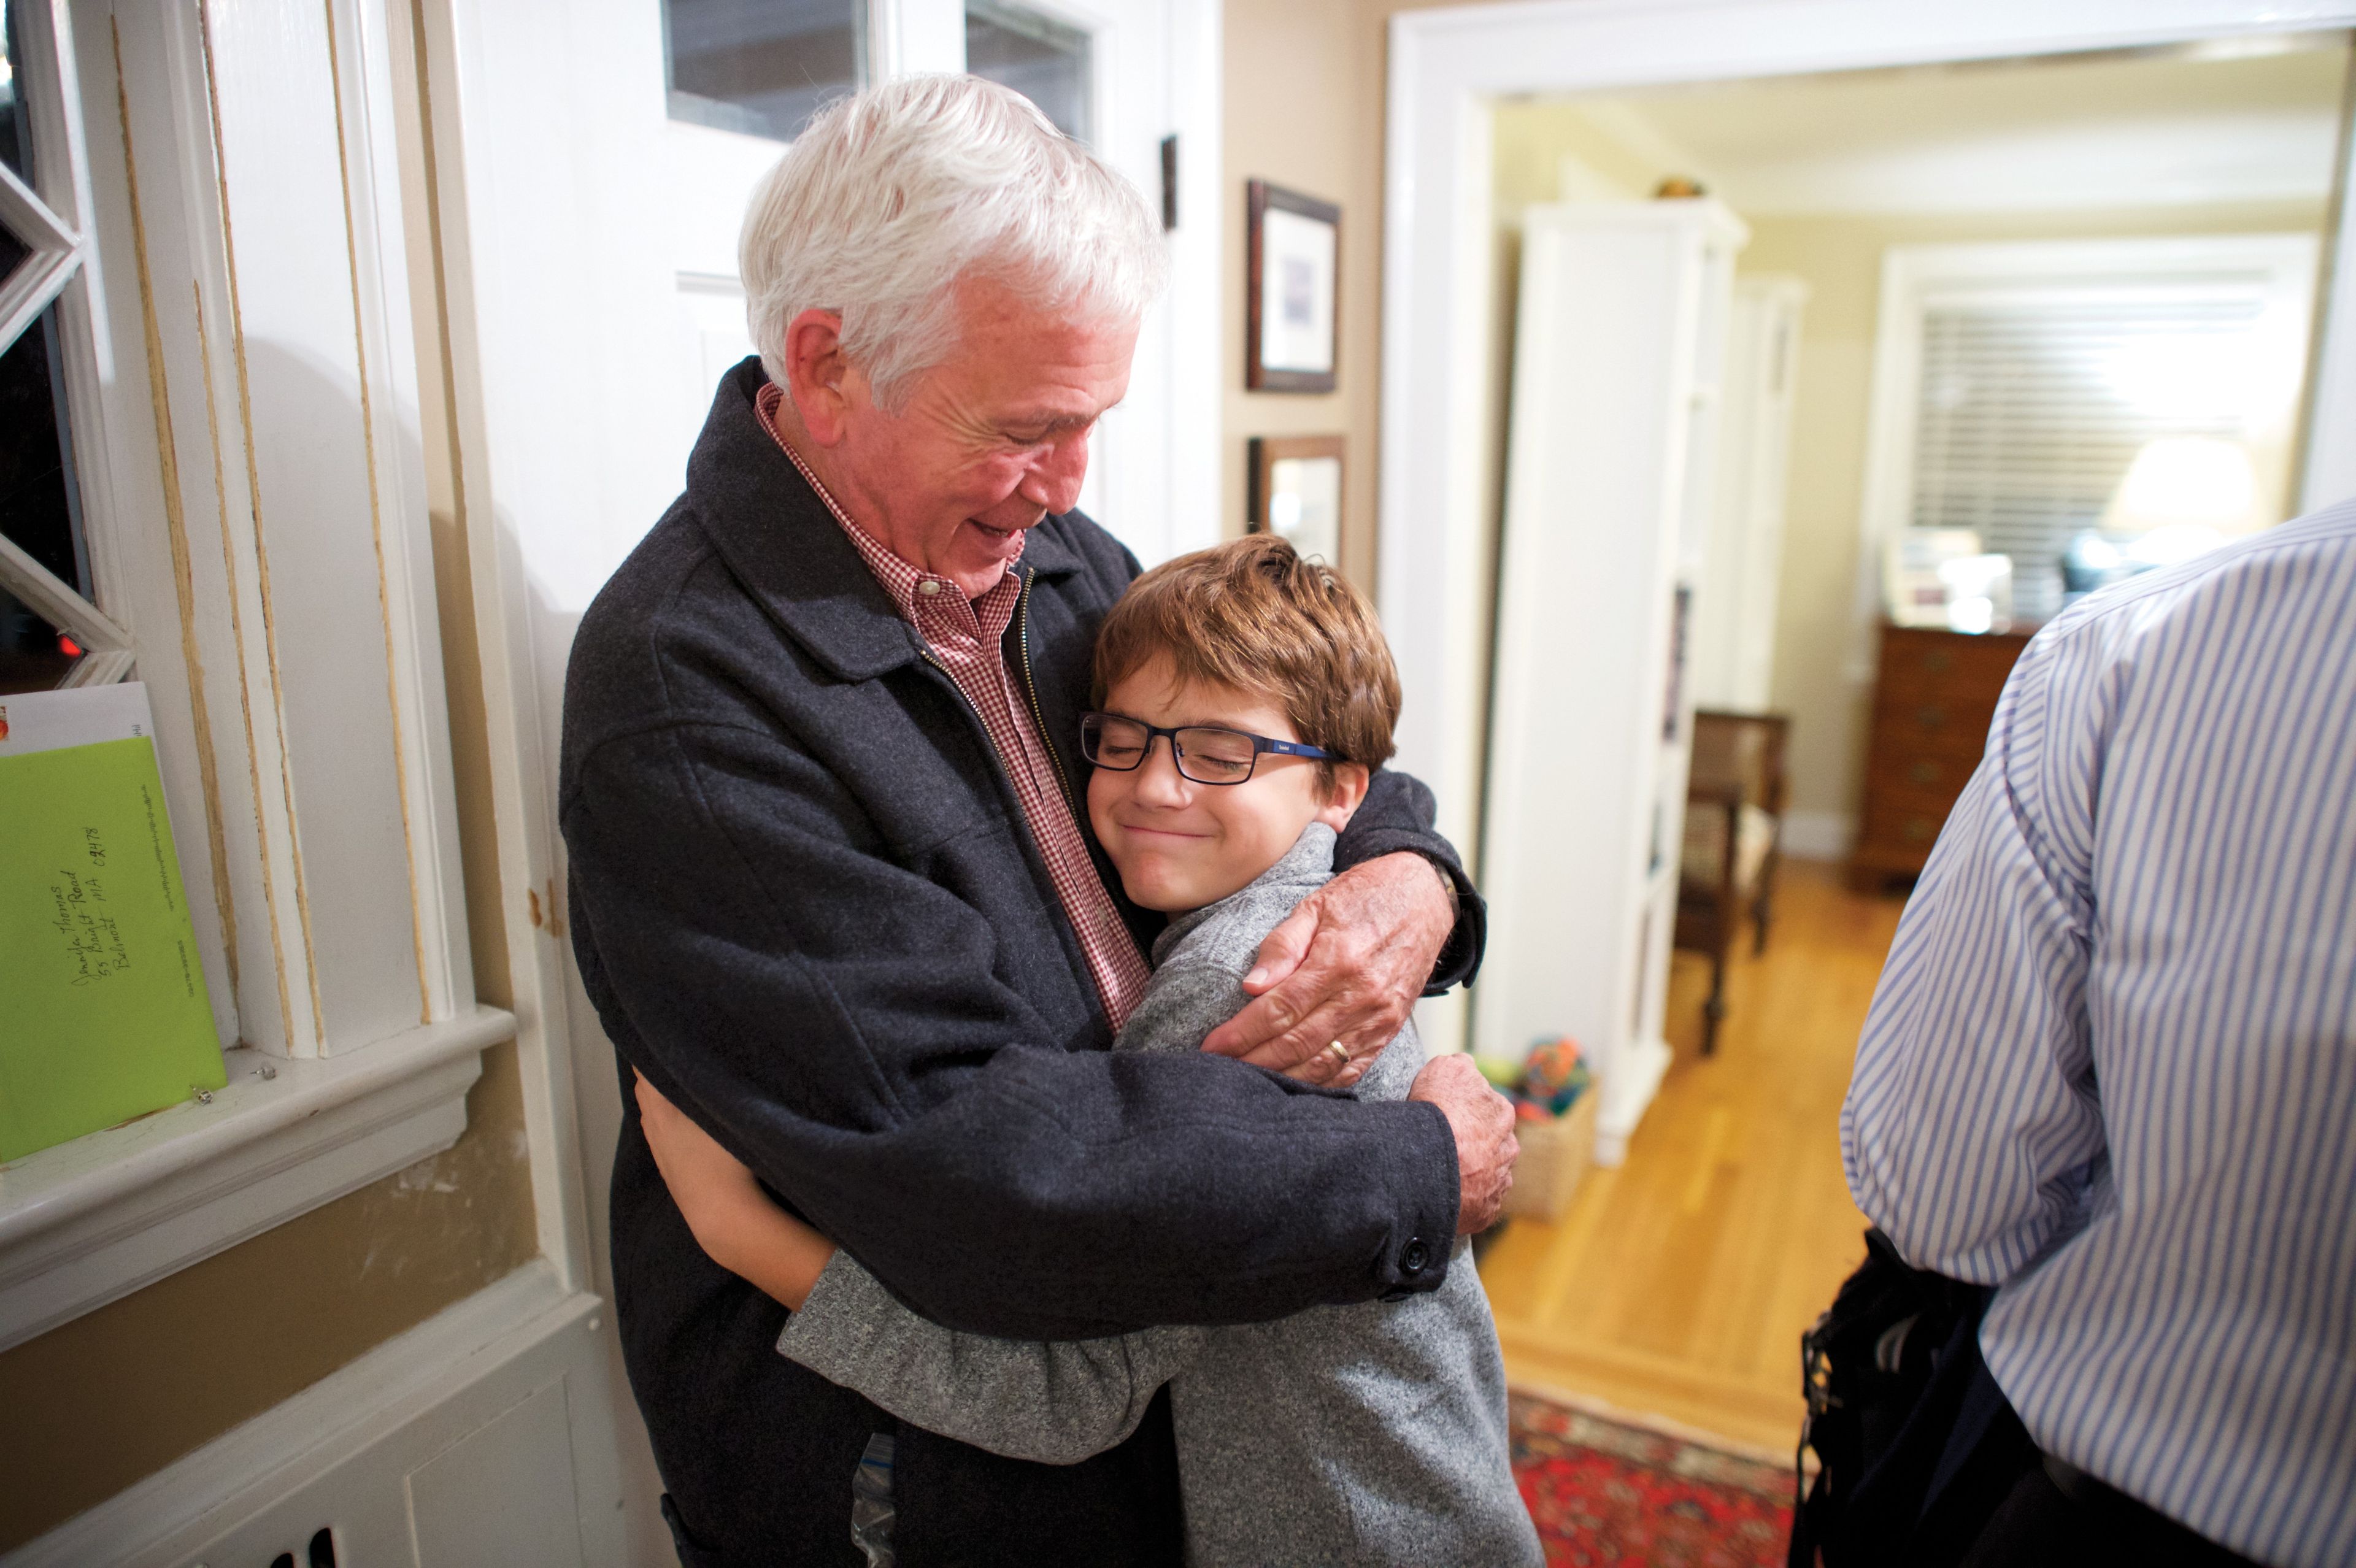 A man stands near the front door and hugs his grandson.